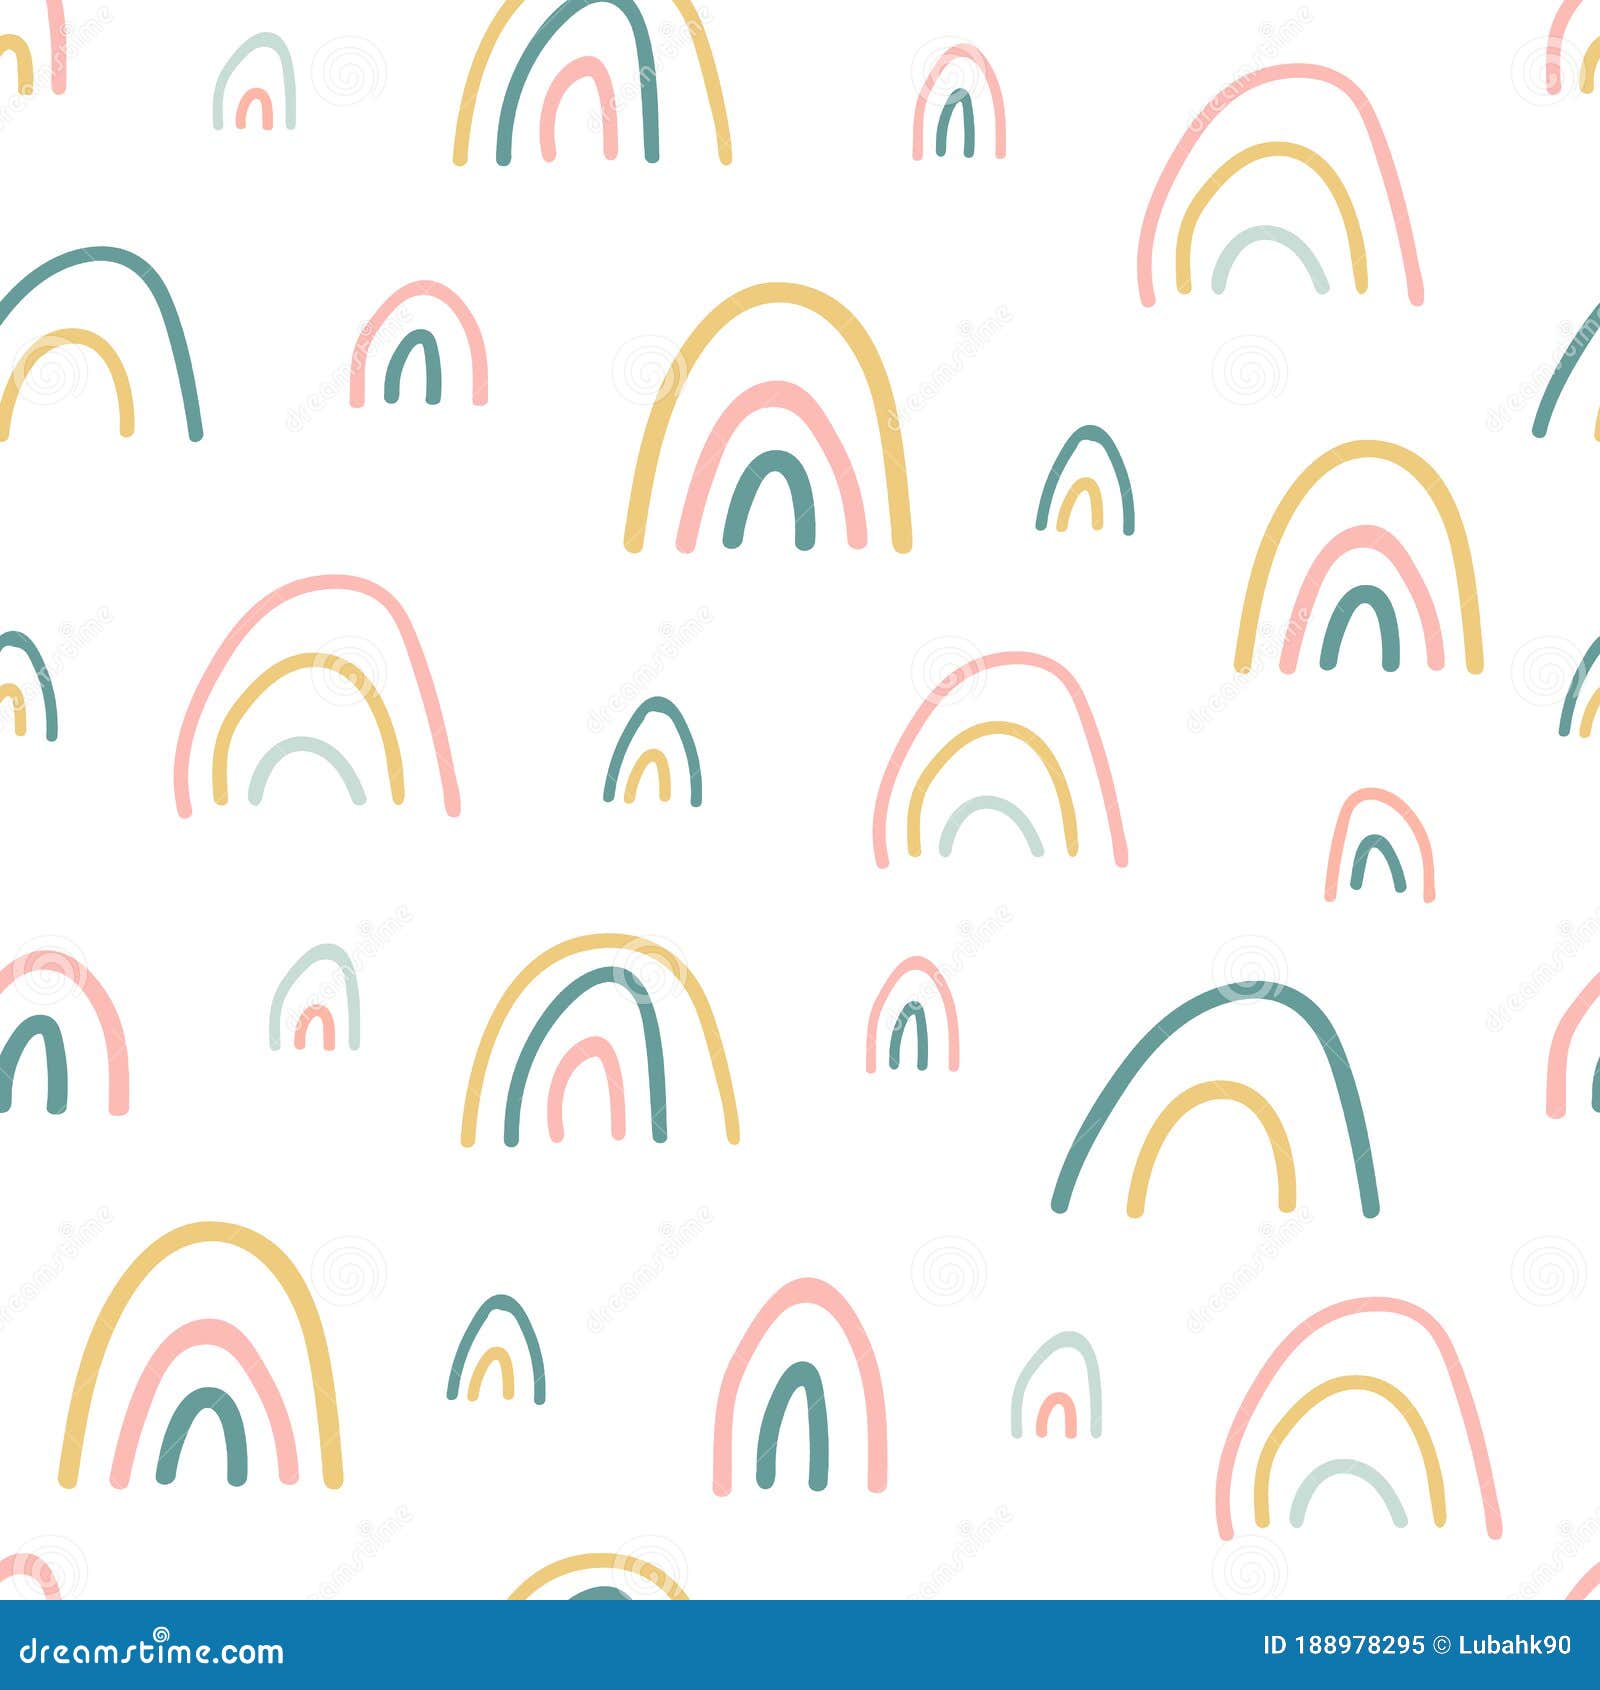 Pastel Cute Rainbow Background, Rainbow, Over The Rainbow, Colorfull  Background Image And Wallpaper for Free Download